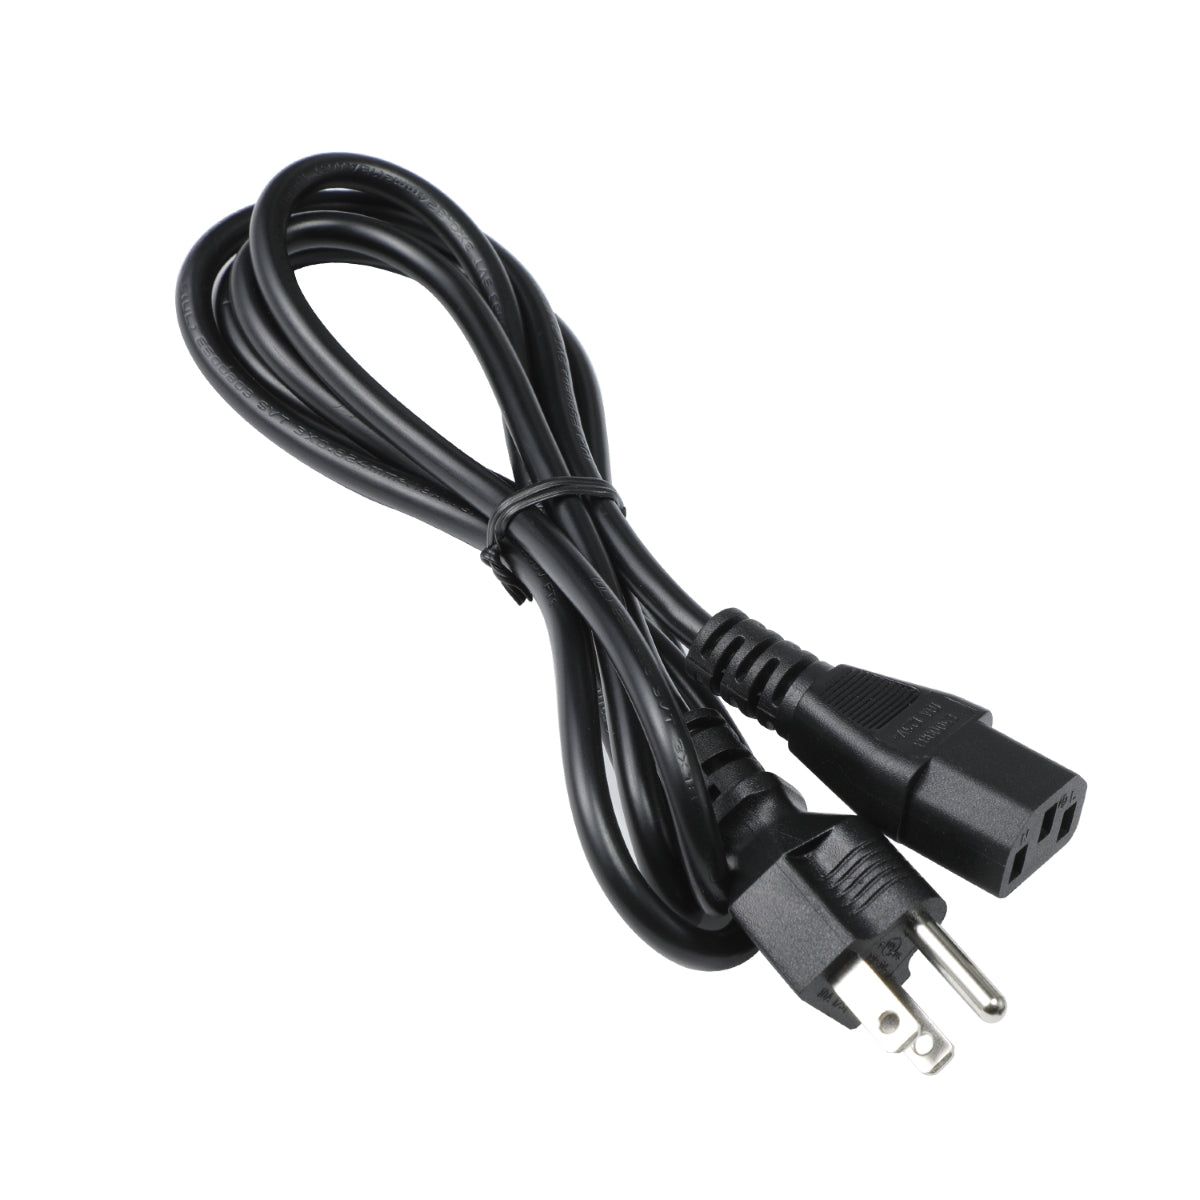 Power Cord for ION iPA76A Audio Block Rocker.